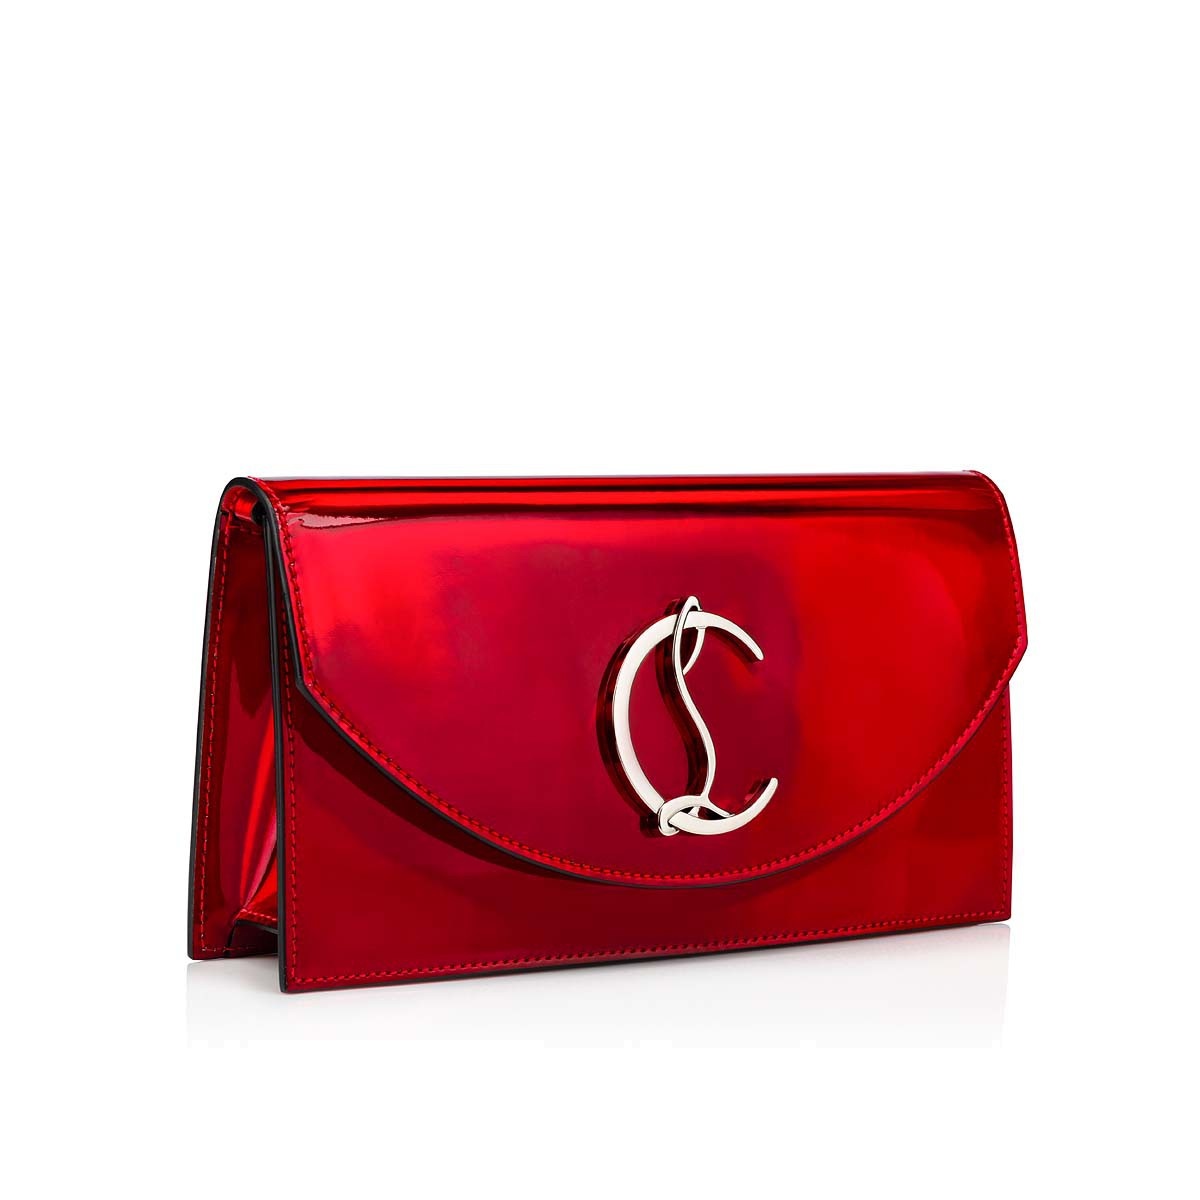 Christian Louboutin Loubi54 Patent Leather Clutch in Red